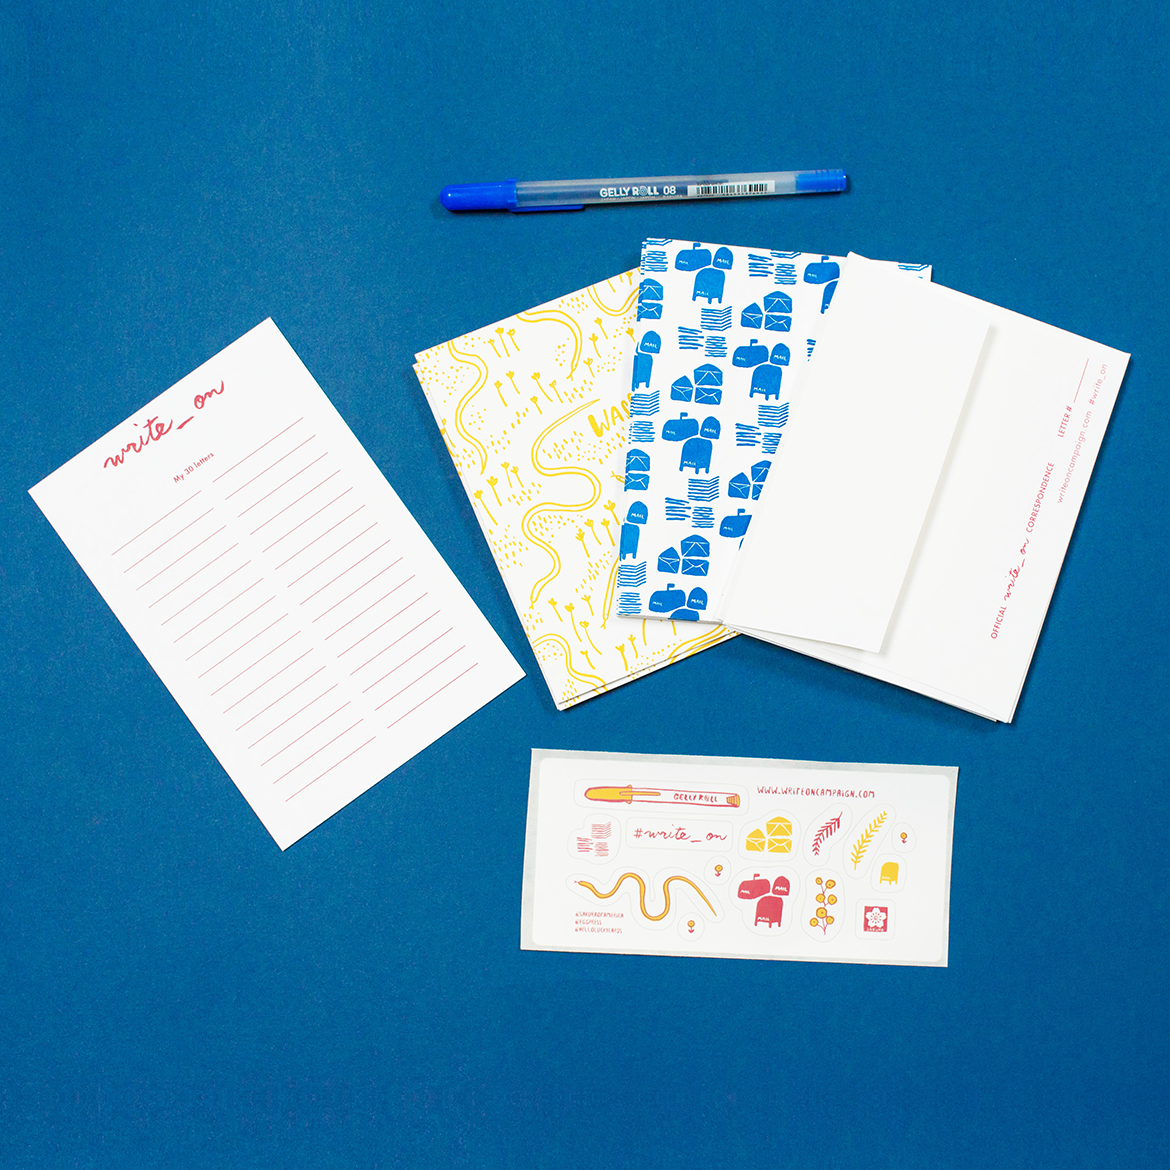 Write on supplies arranged on a blue background